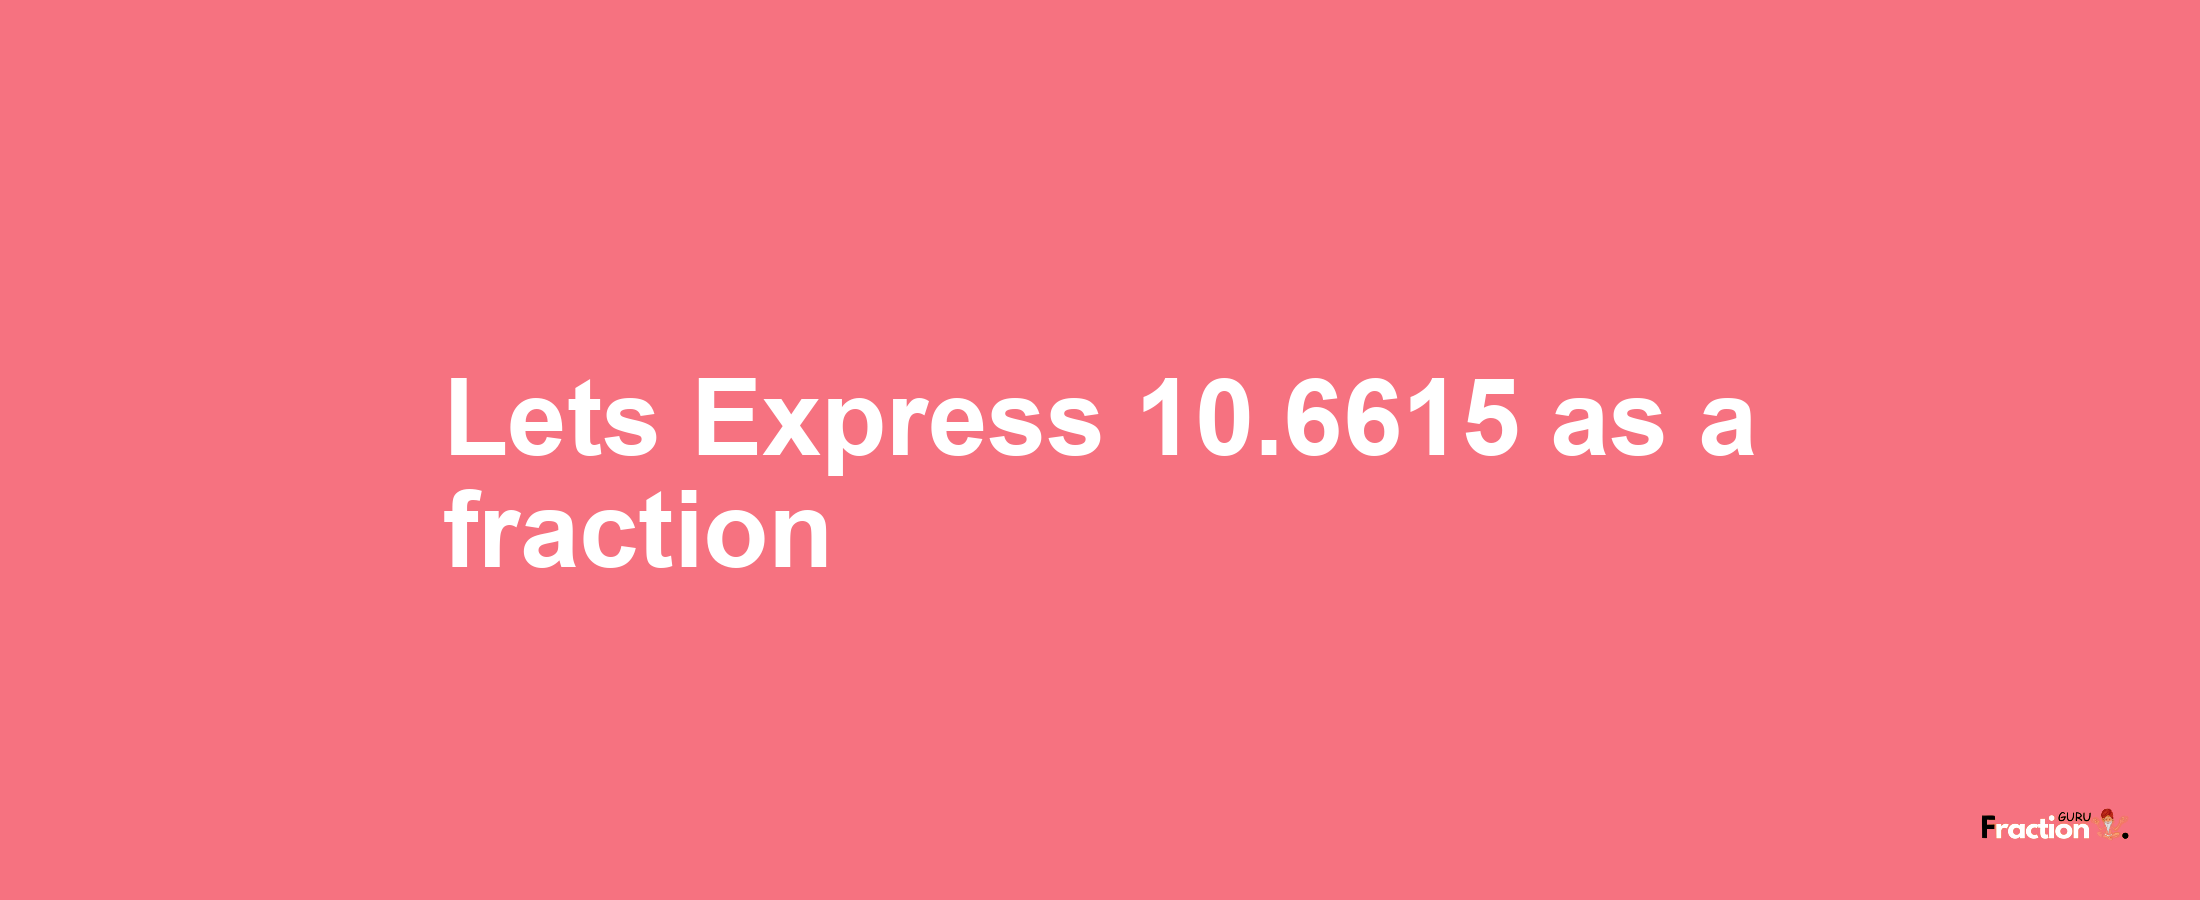 Lets Express 10.6615 as afraction